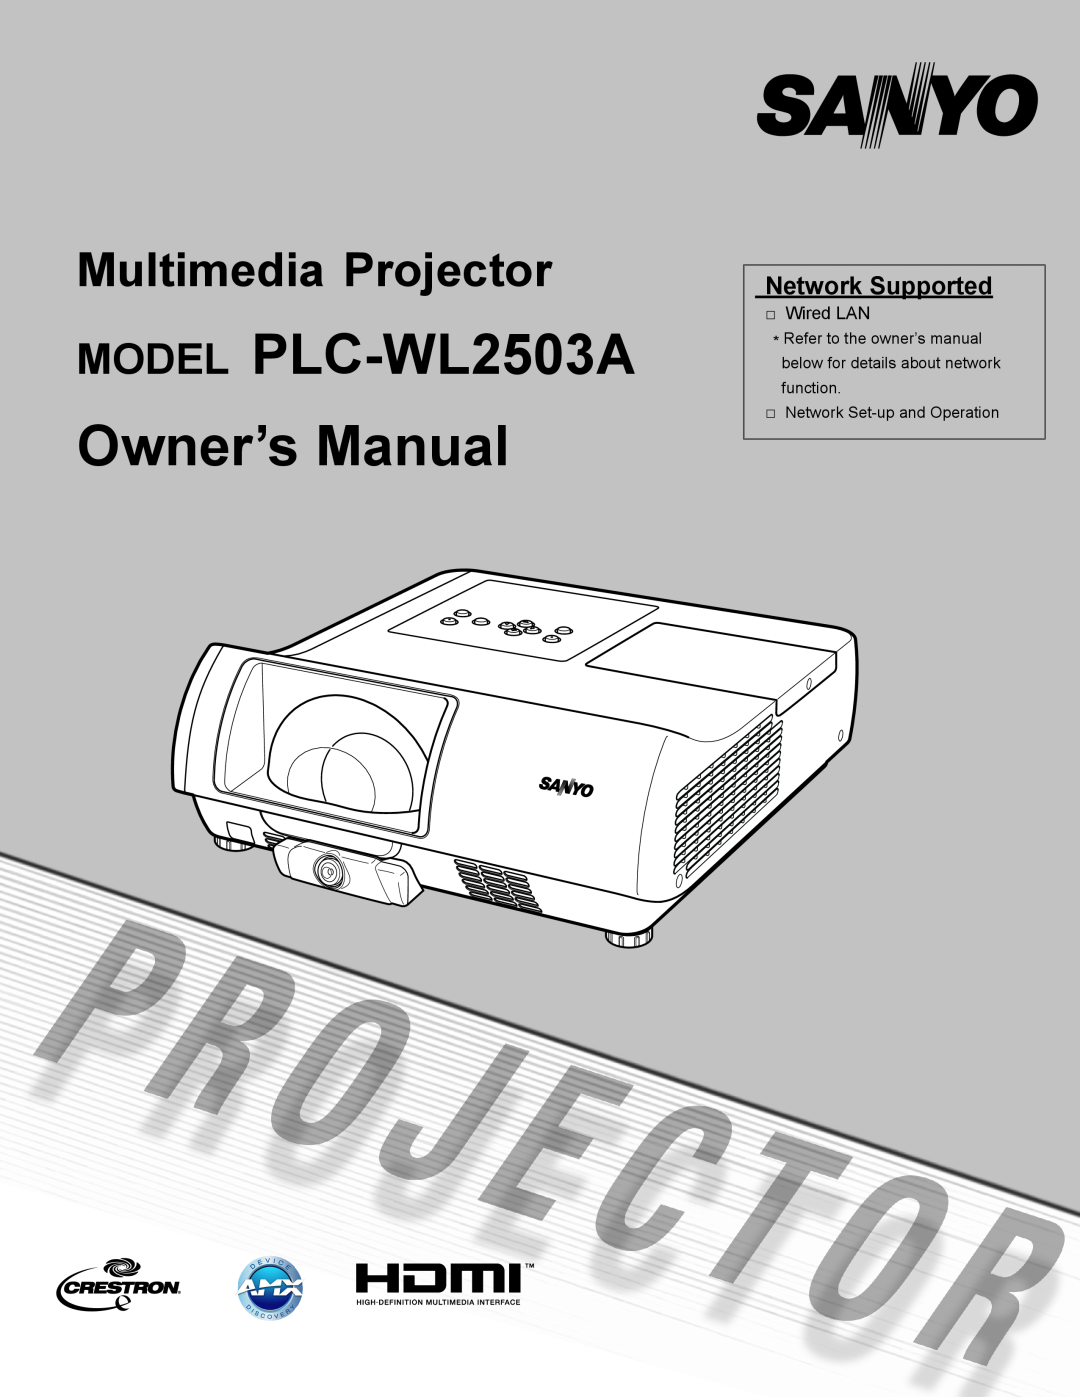 Sanyo owner manual Network Supported, MODEL PLC-WL2503A Owner’s Manual, Multimedia Projector 